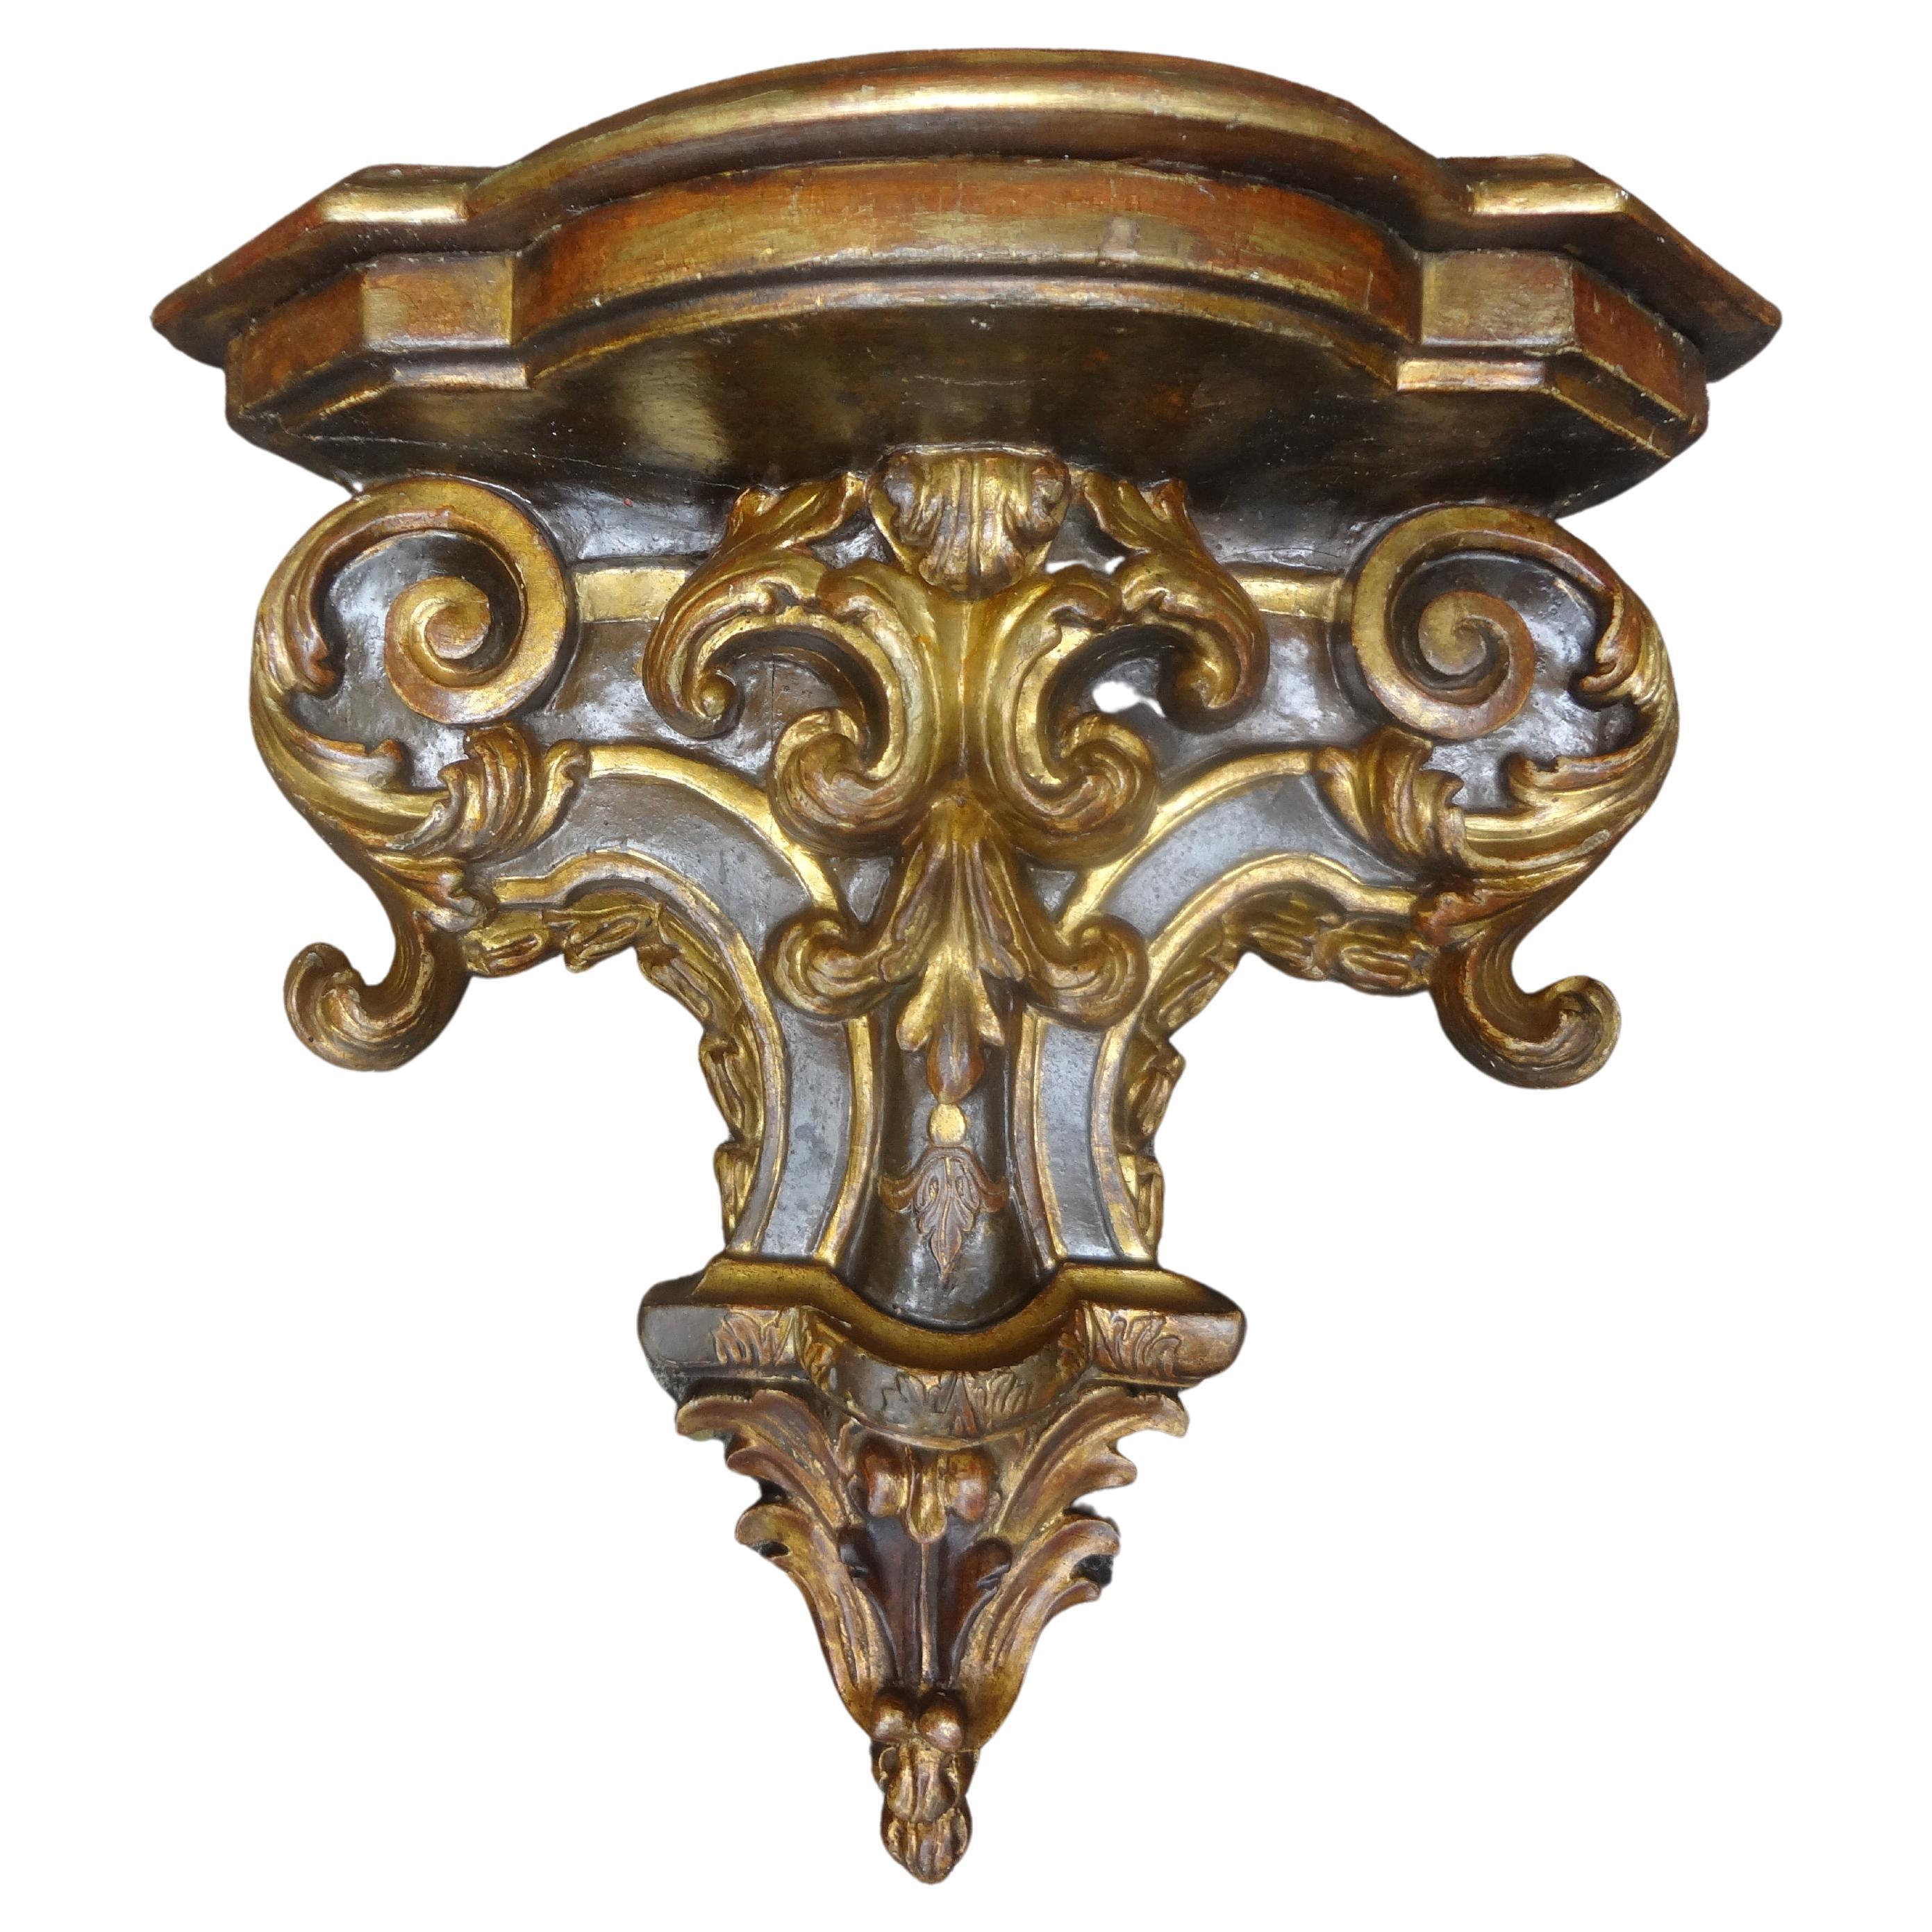 Pair Of 19th century Italian Painted and Gilt wood Wall Brackets.
Stunning large pair of Italian Baroque style painted and gilt wood wall brackets or wall consoles.
Great Size and gorgeous patina!